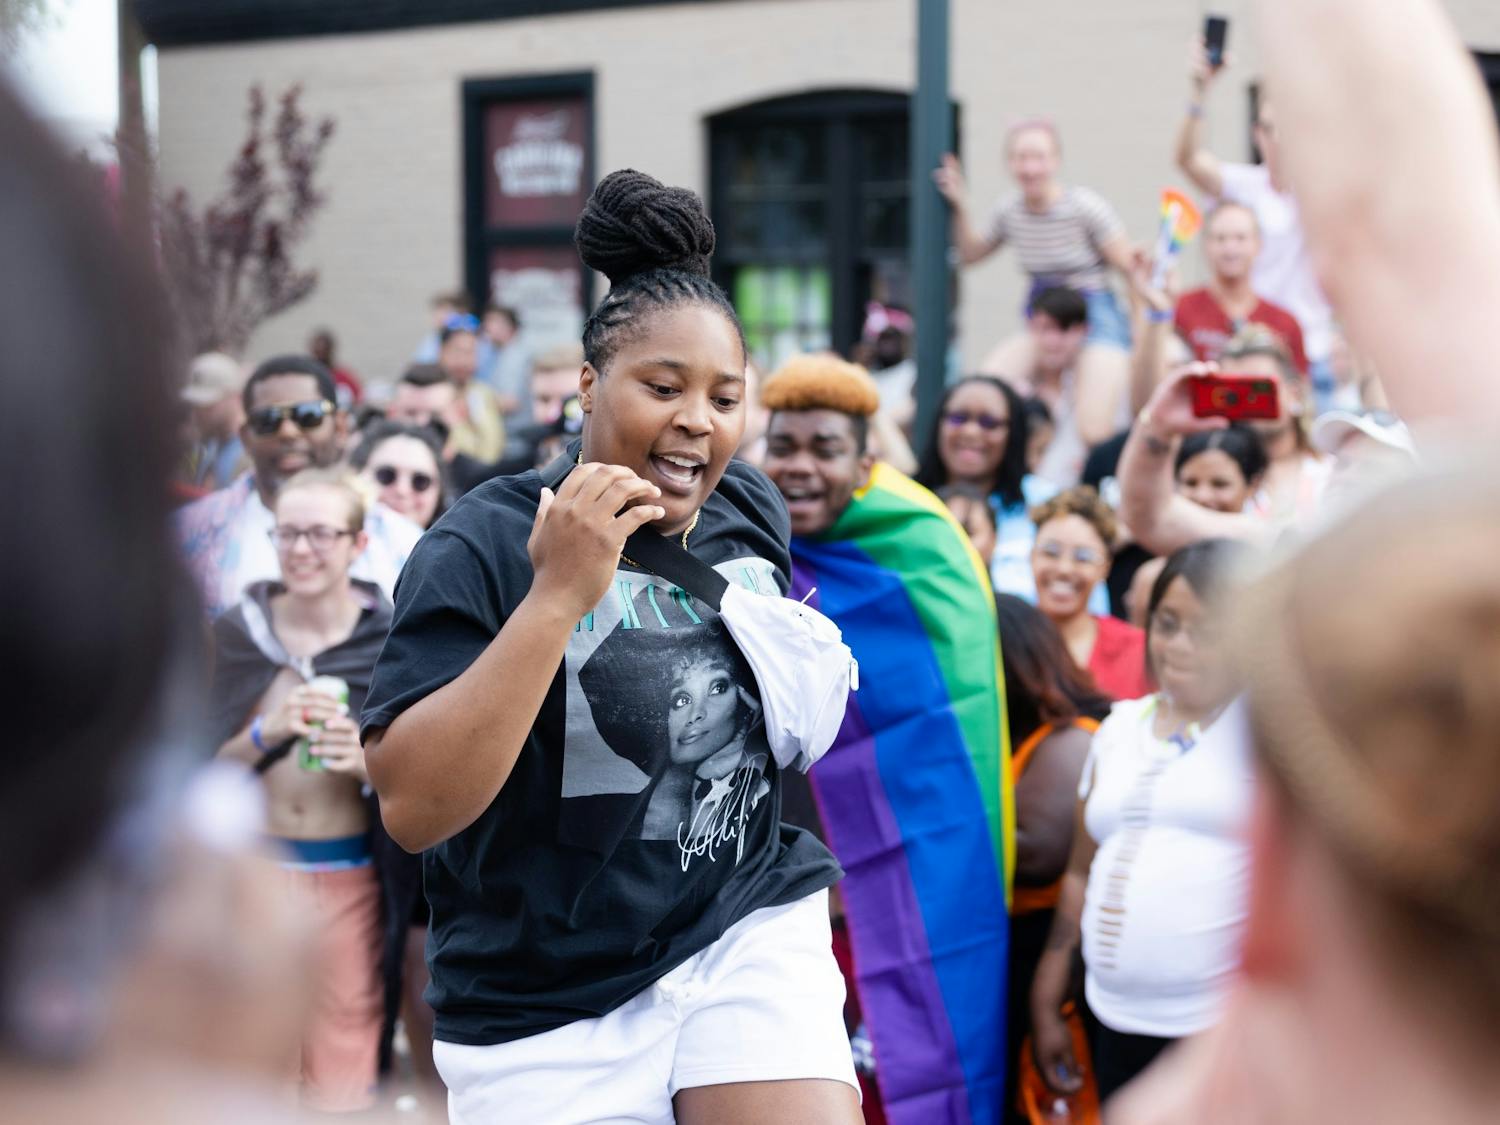 An Outfest attendee shows off their moves as a dance circle breaks out on Park Street on June 4, 2022. Outfest featured performances, food and vendors in honor of Pride month.